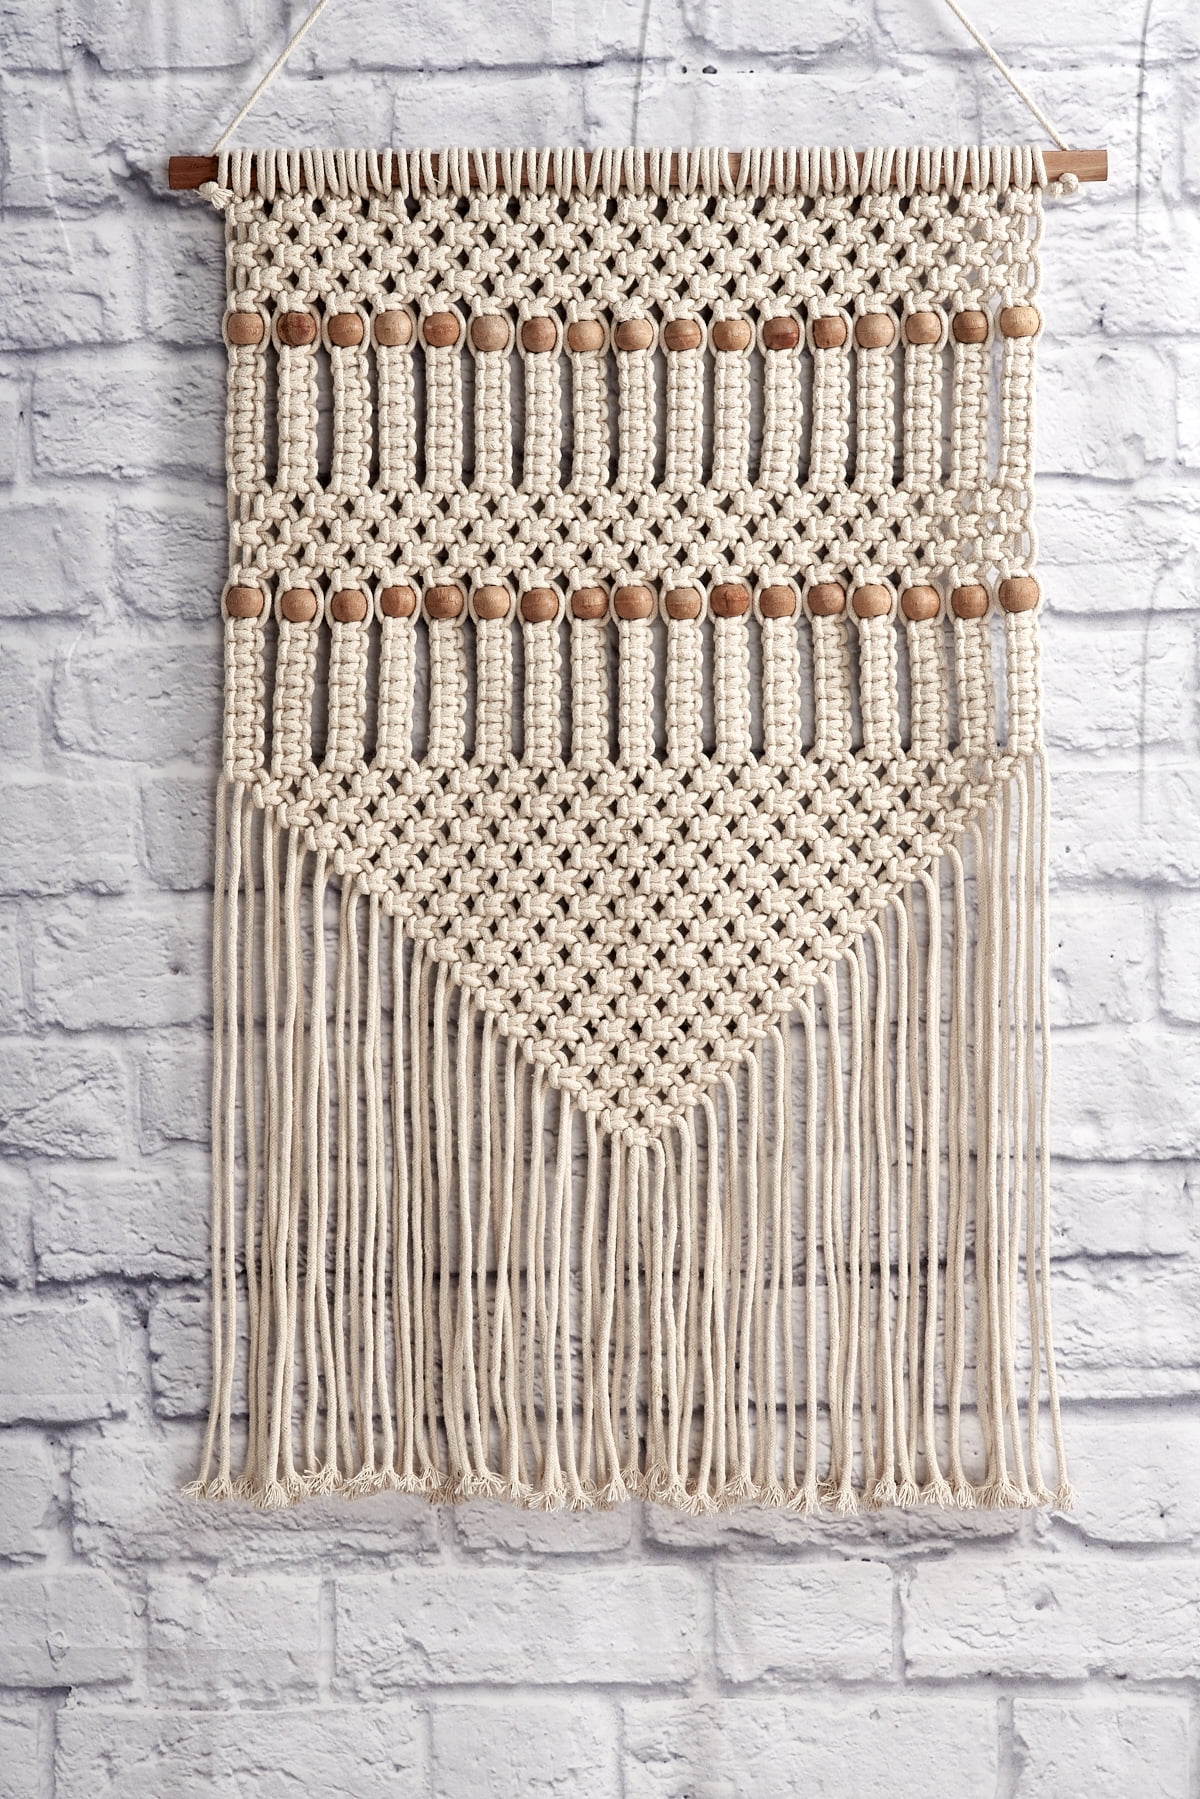 Cream Macrame Wall Hanging with Beads on Branch